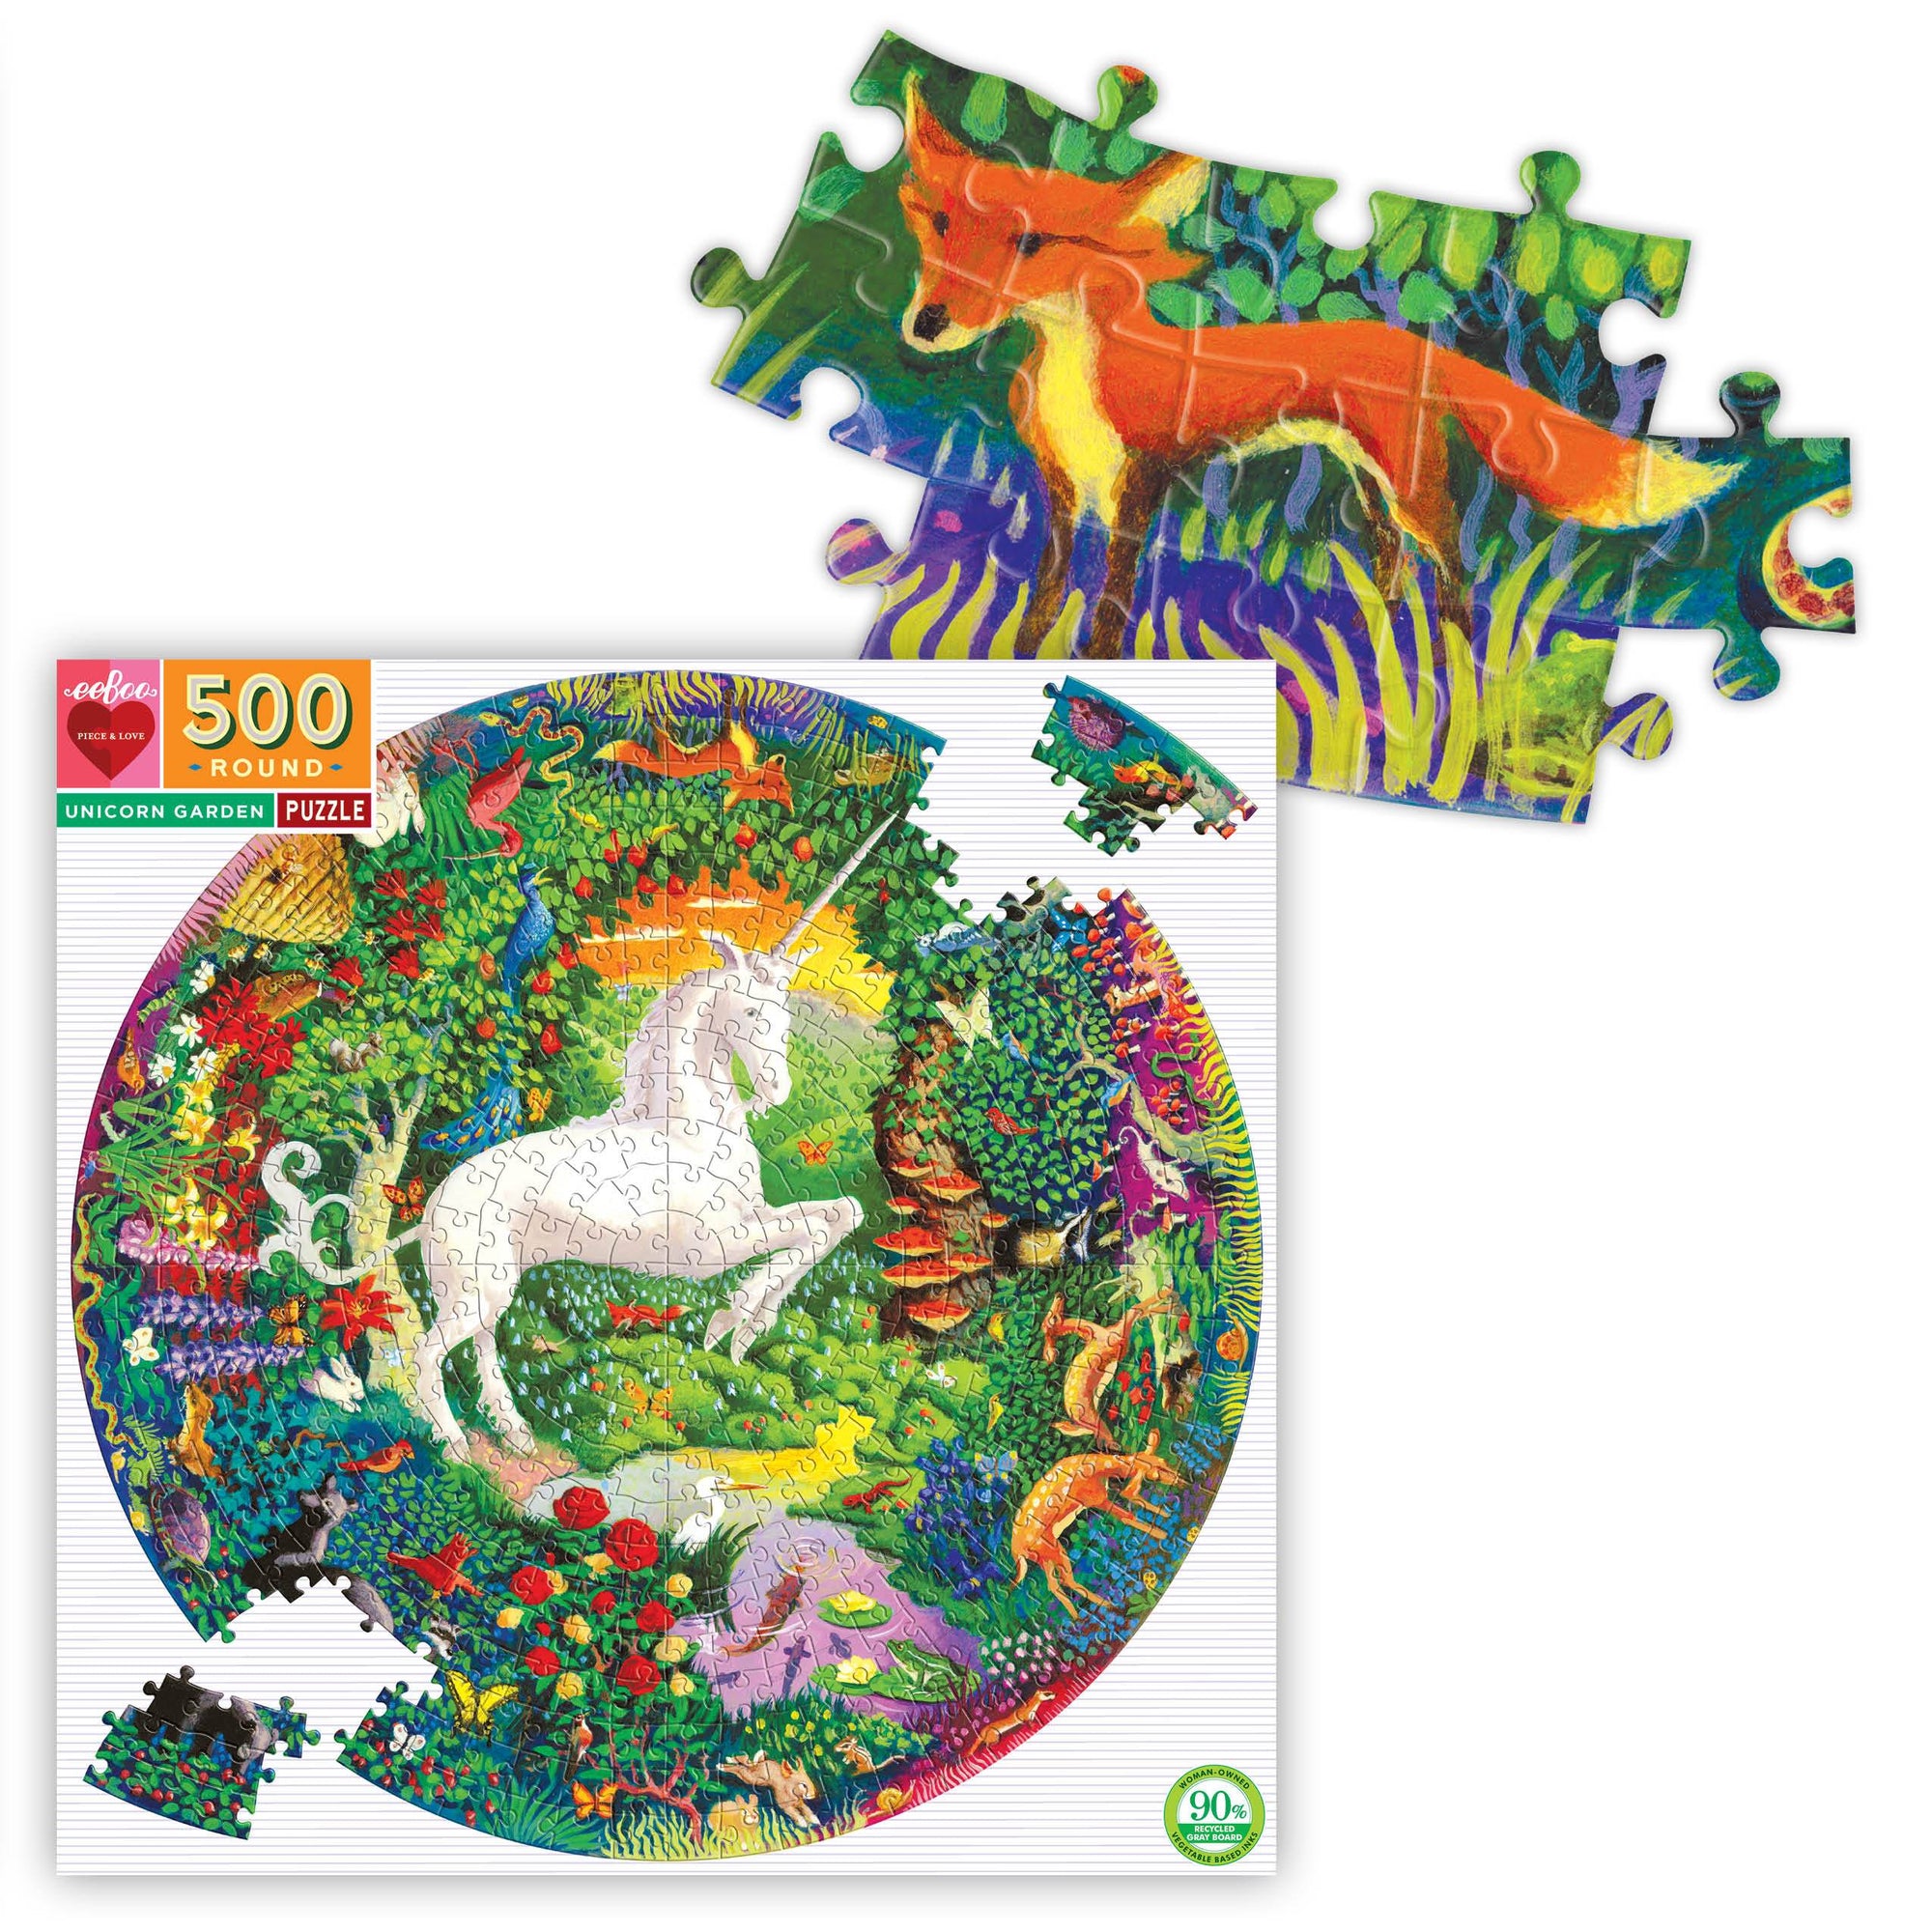 Box featuring image of a white unicorn rearing up in the center of a colorful garden with animals, with a detail of pieces assembled with a red fox on them.